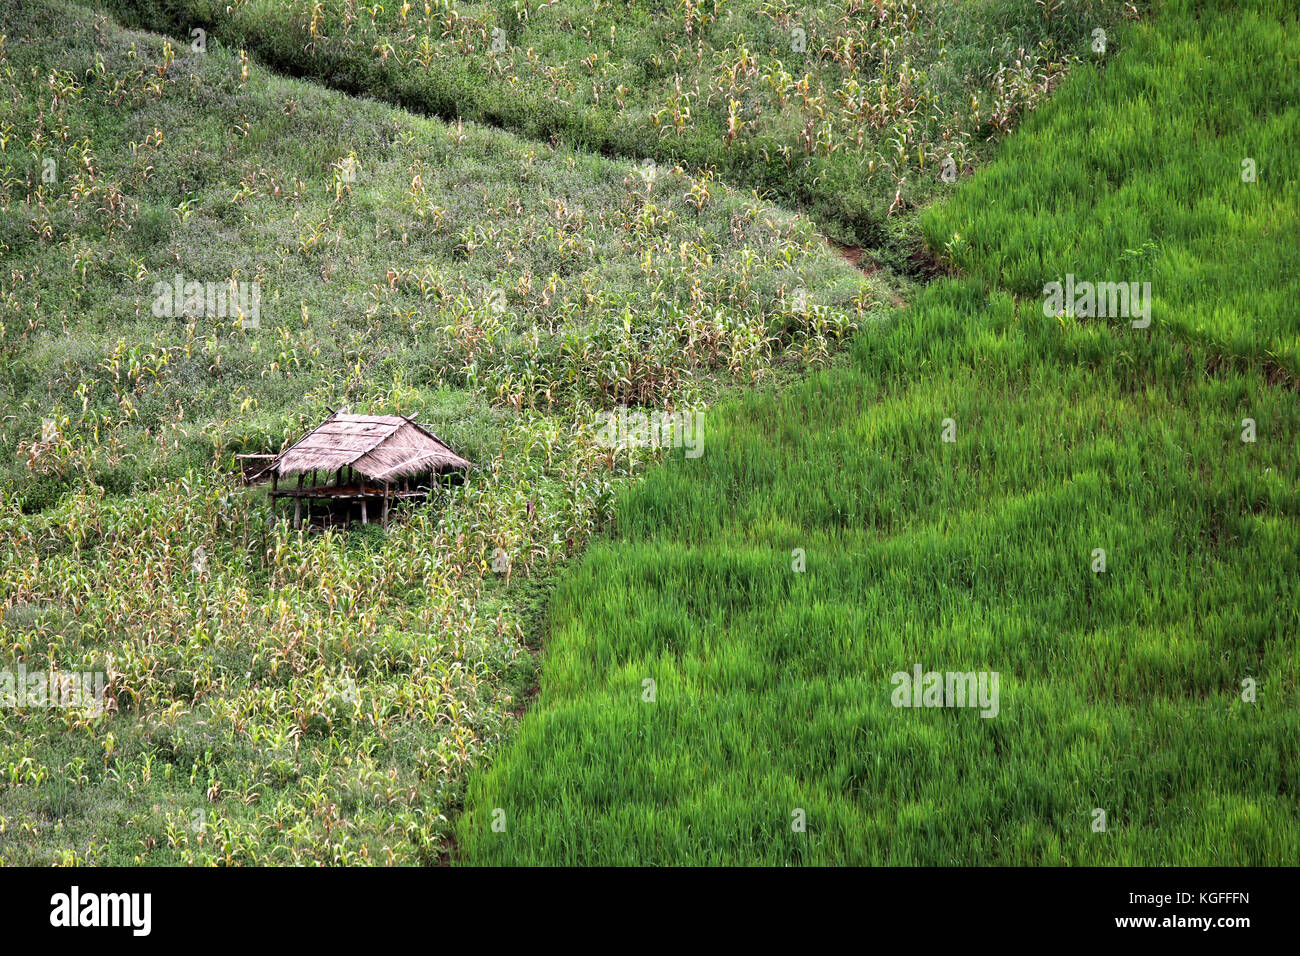 rice in paddy field with rural cottage Stock Photo